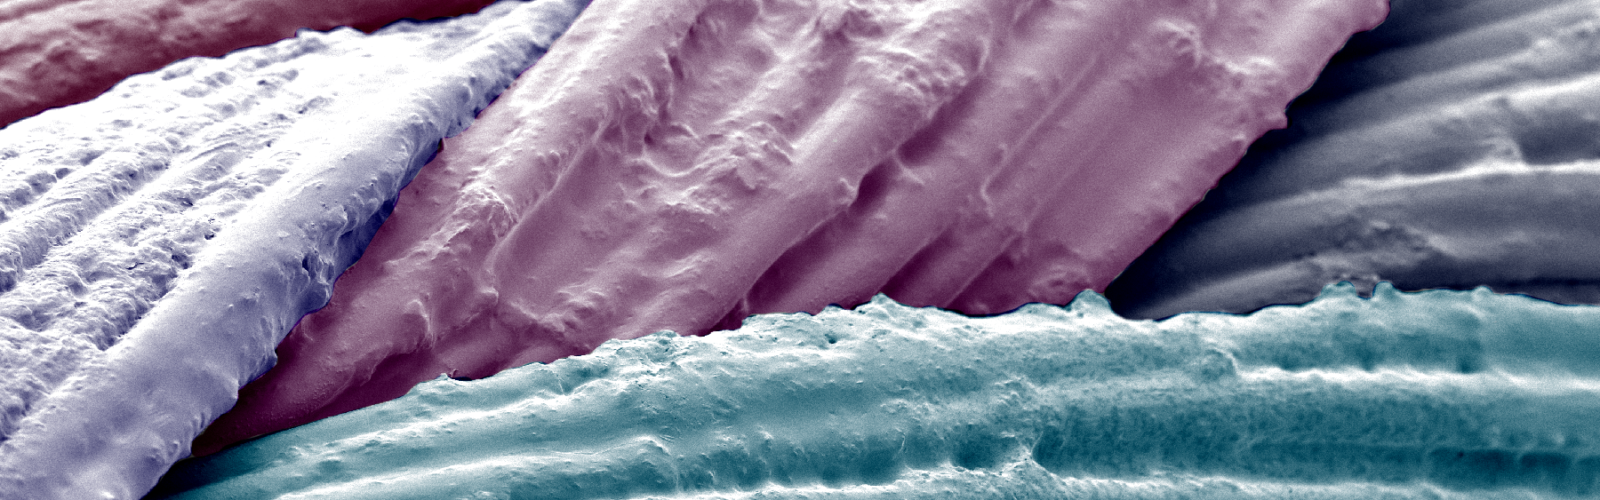 Decorative image for research optimizing the solution conditions in formulating electrostatically assembled siRNA-coated sutures. Image depicts the braided strands of a suture with SEM imaging. A thin film coating can be seen on the strand surfaces. Each strand artificially colored.